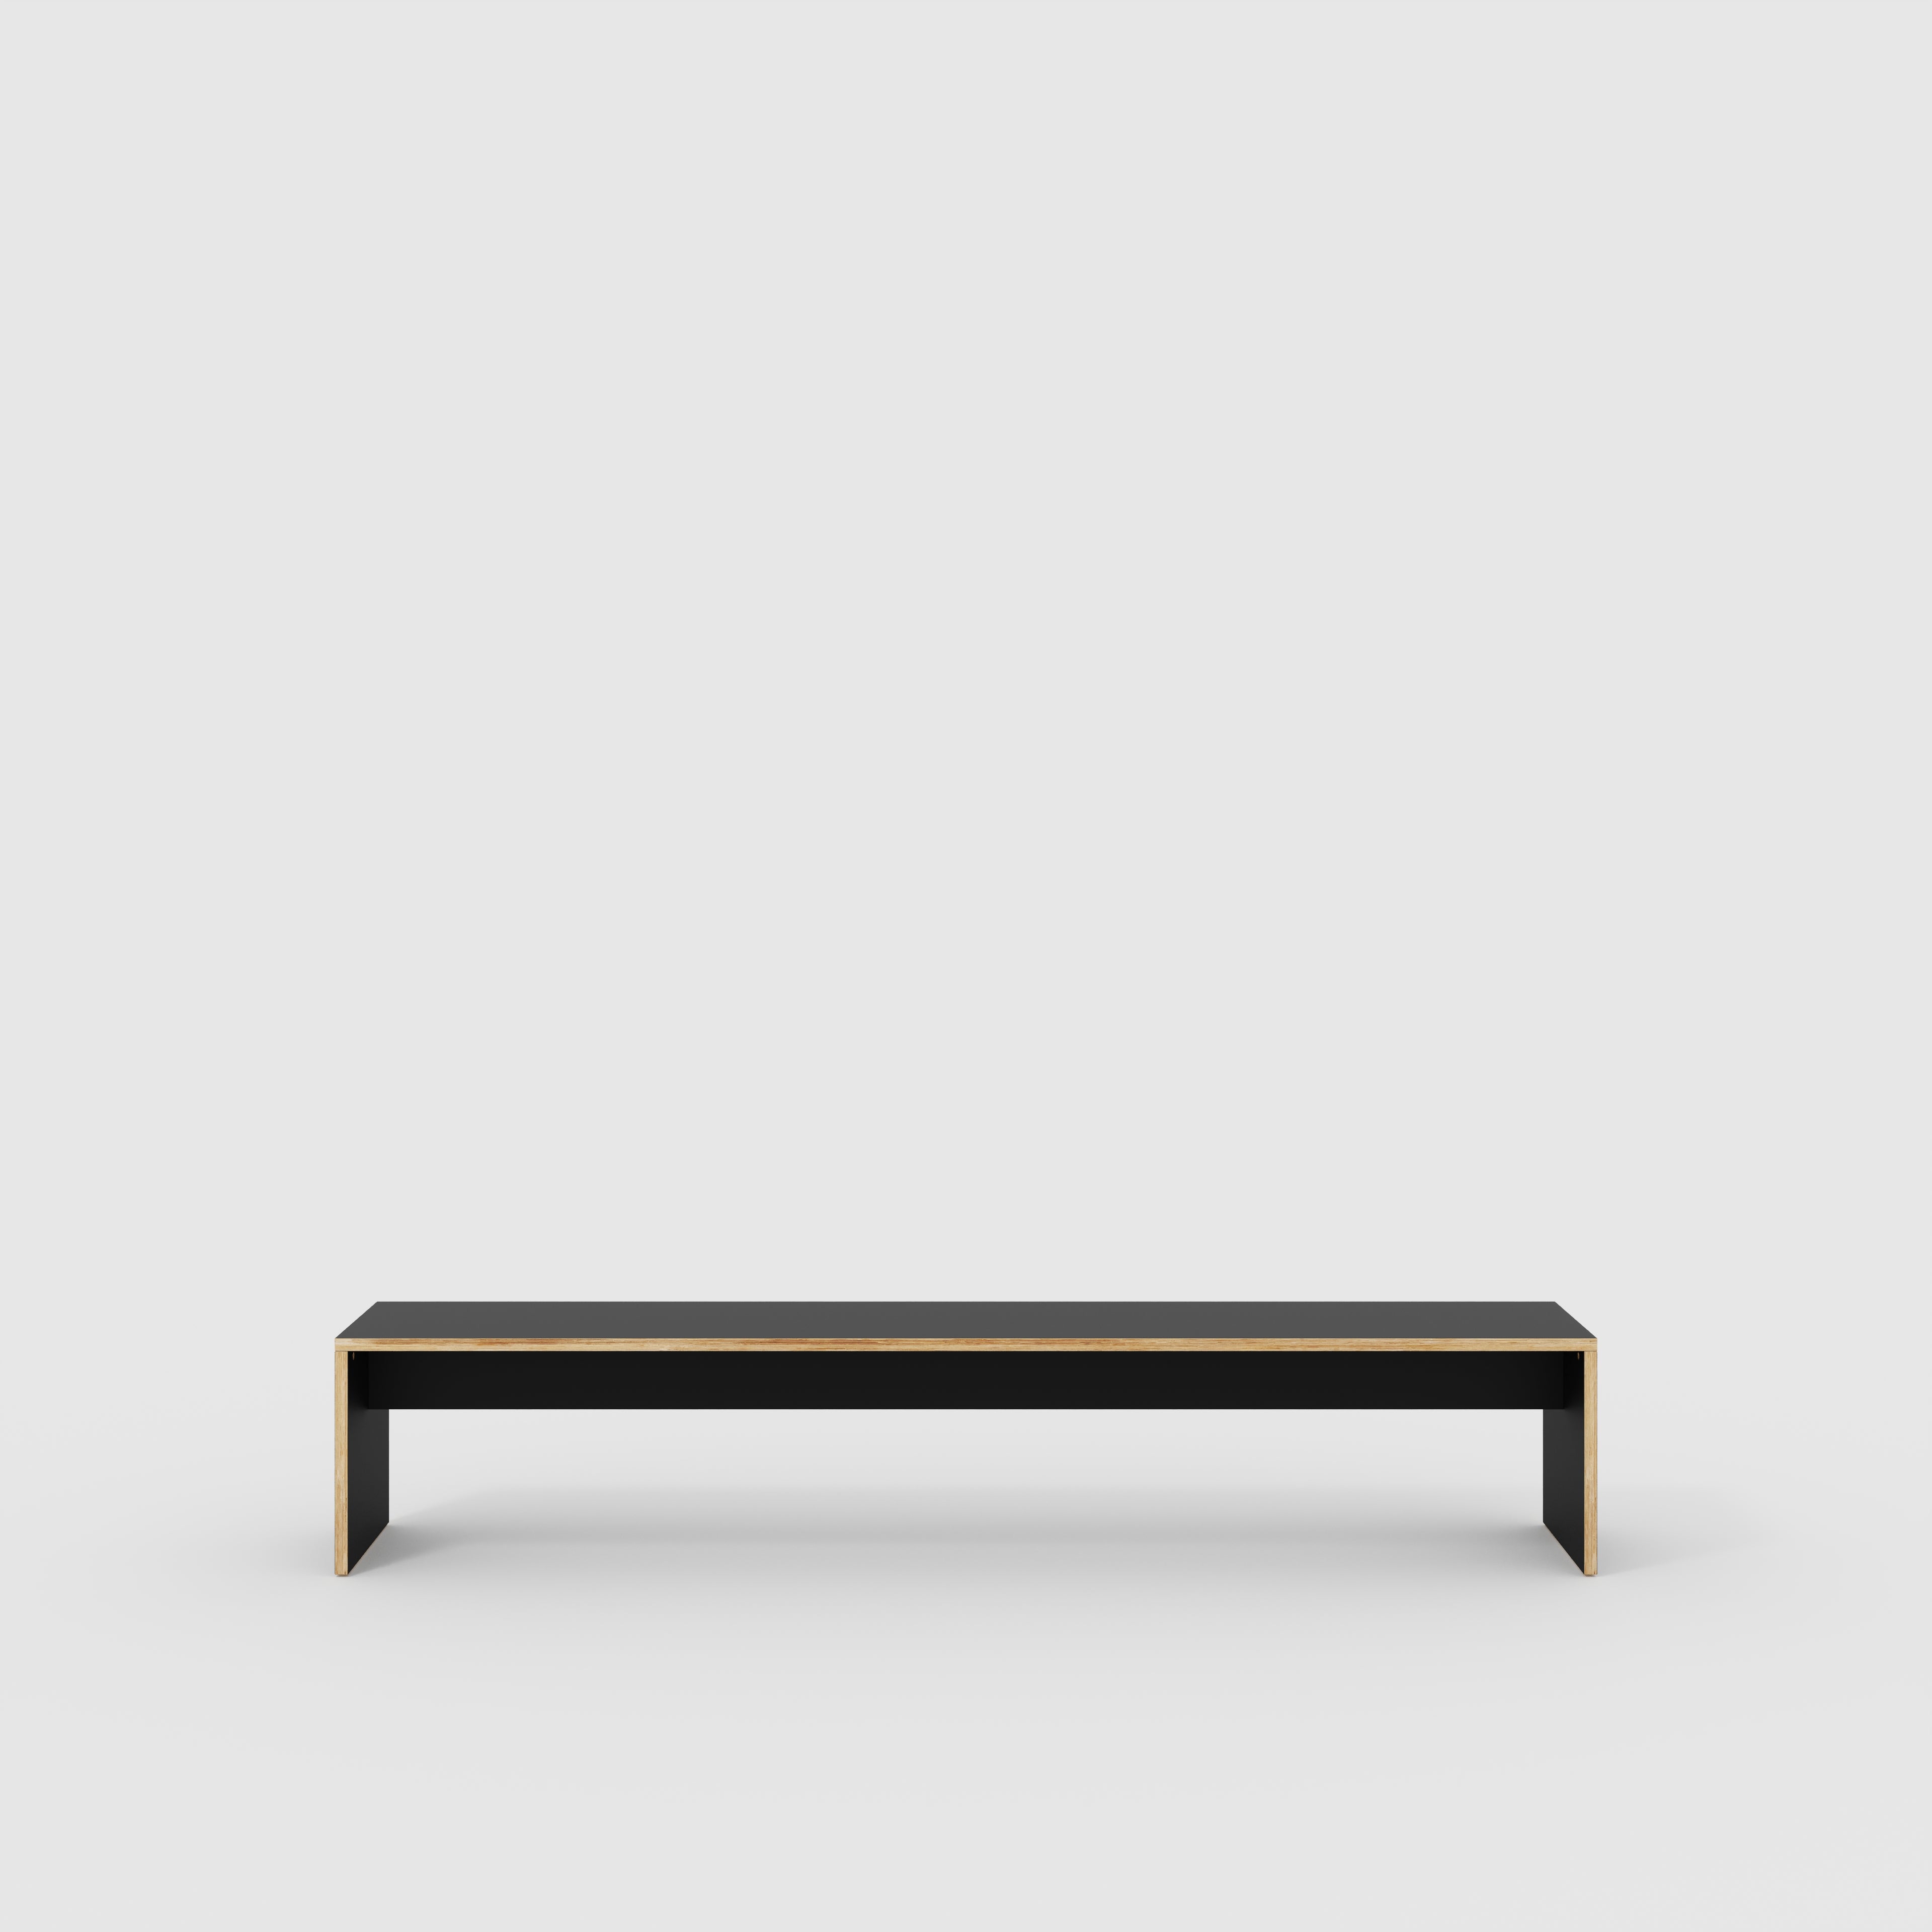 Bench Seat with Solid Sides - Formica Diamond Black - 2400(w) x 400(d)